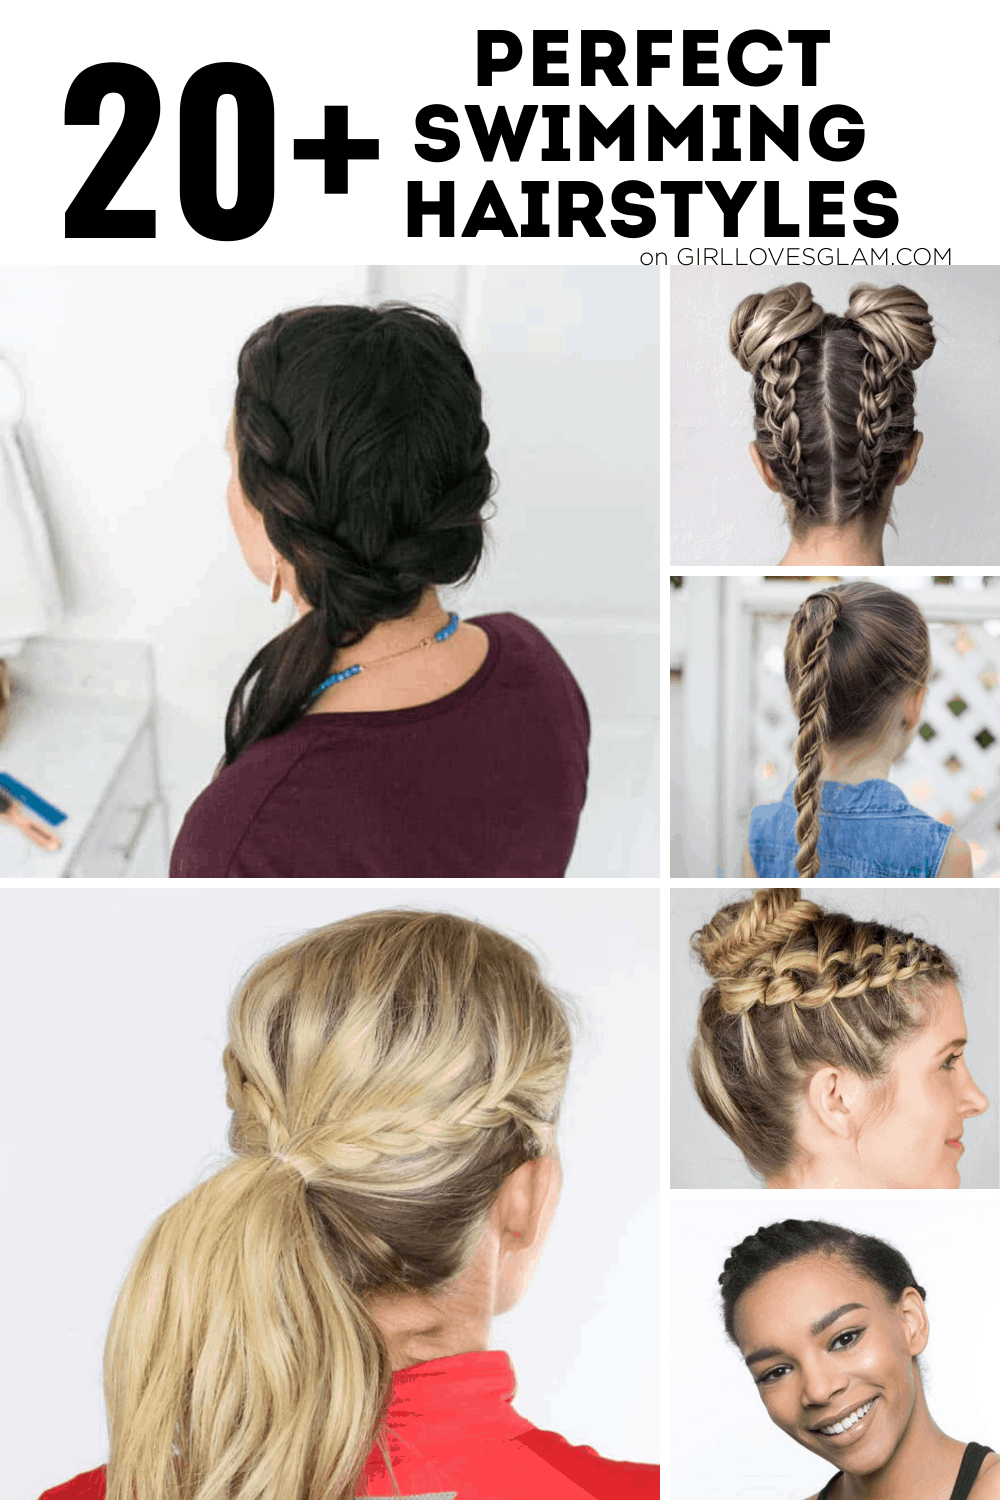 15 Best Hairstyles for Teenage Girls with Short Hair